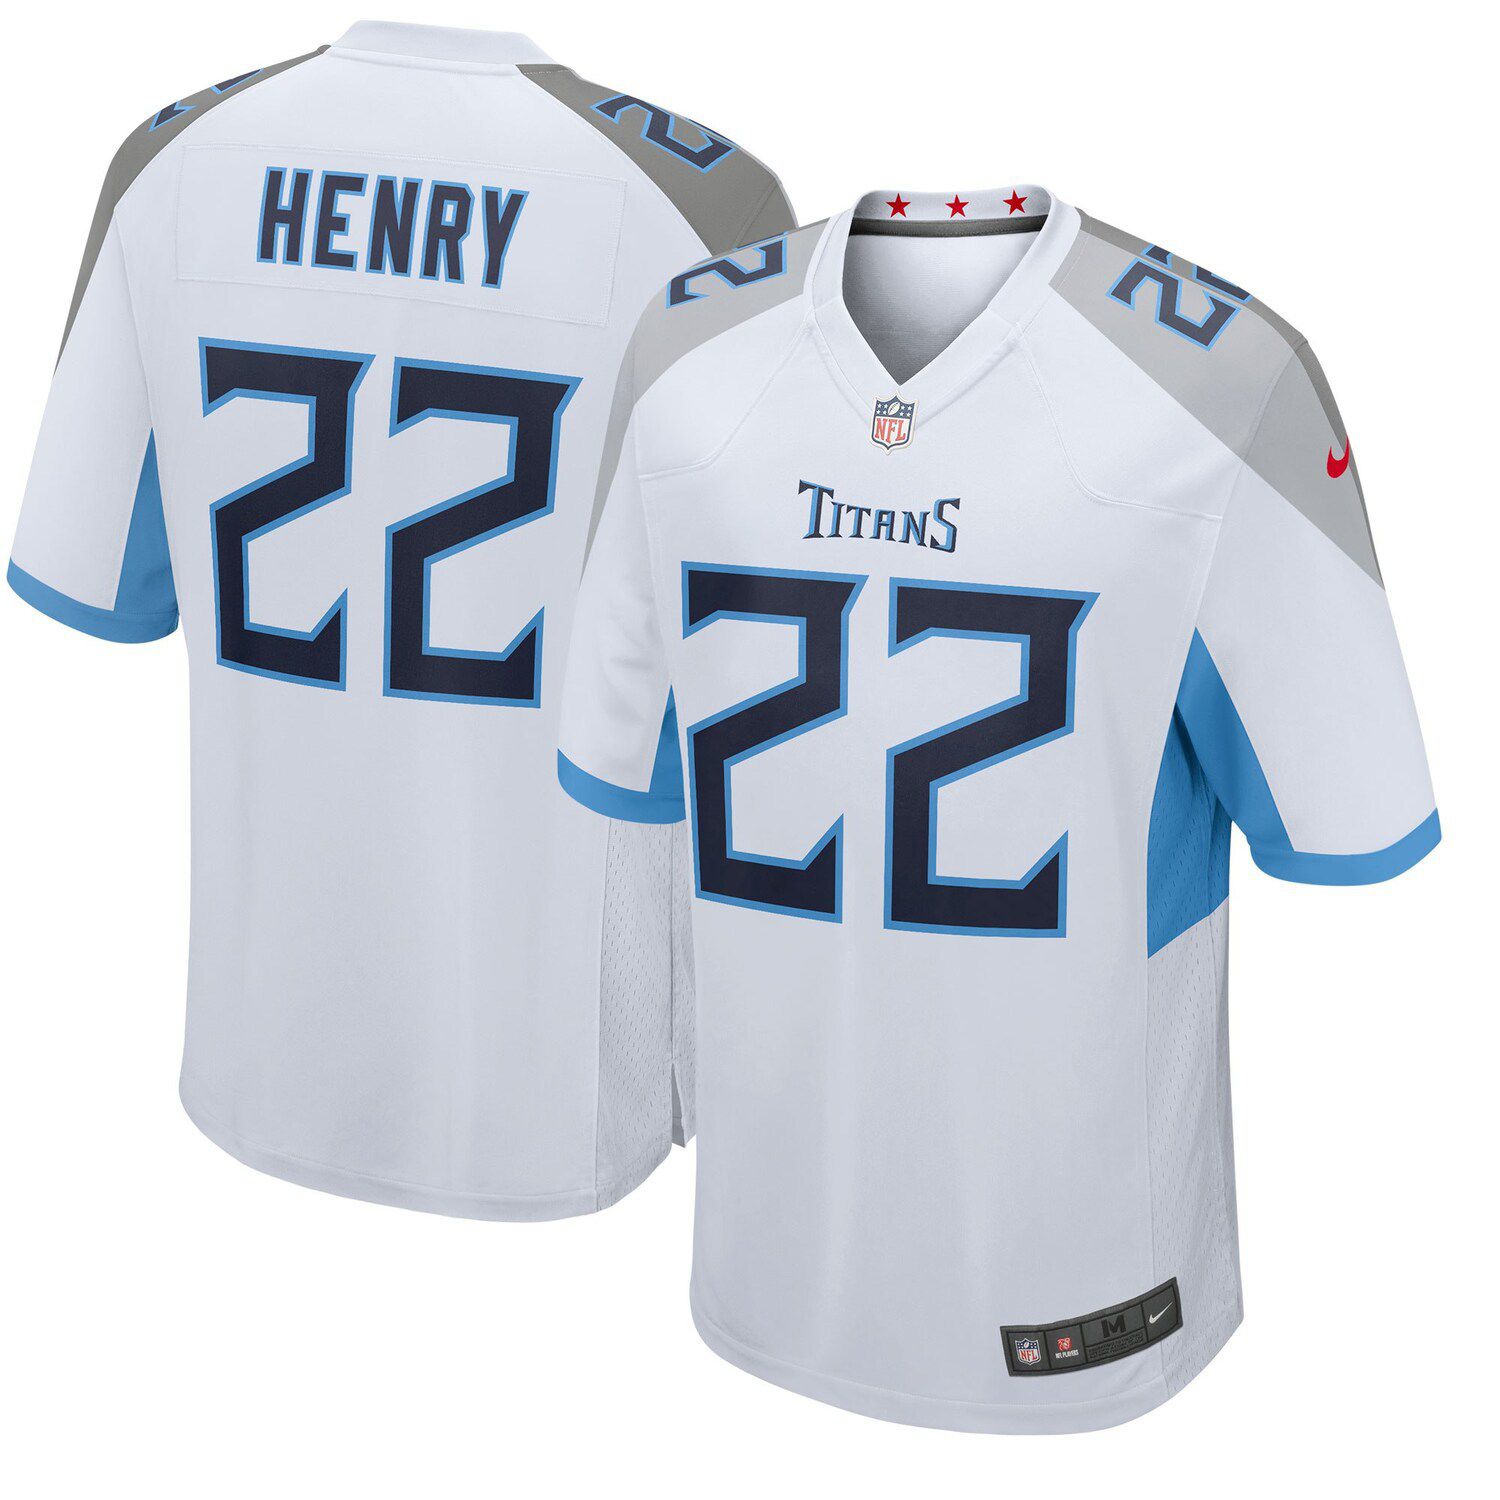 white tennessee jersey